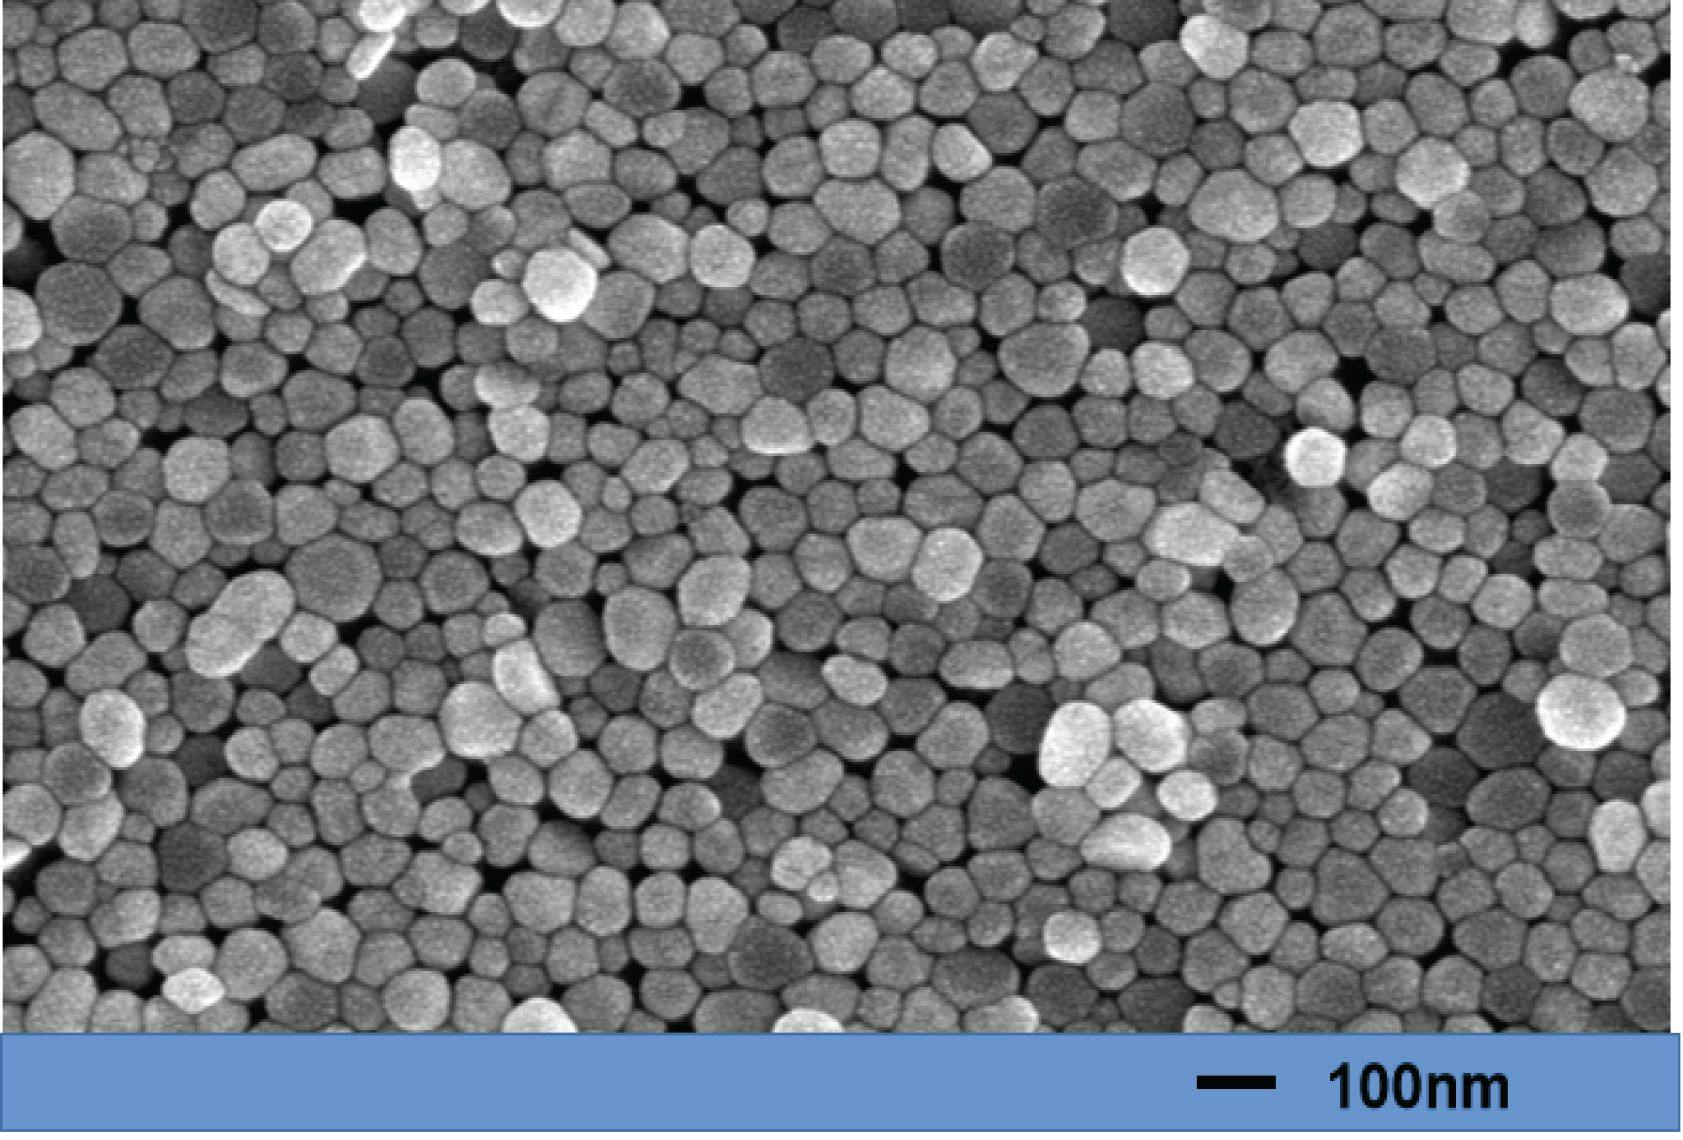 FIGURE 1: SEM image of silver sol substrate.